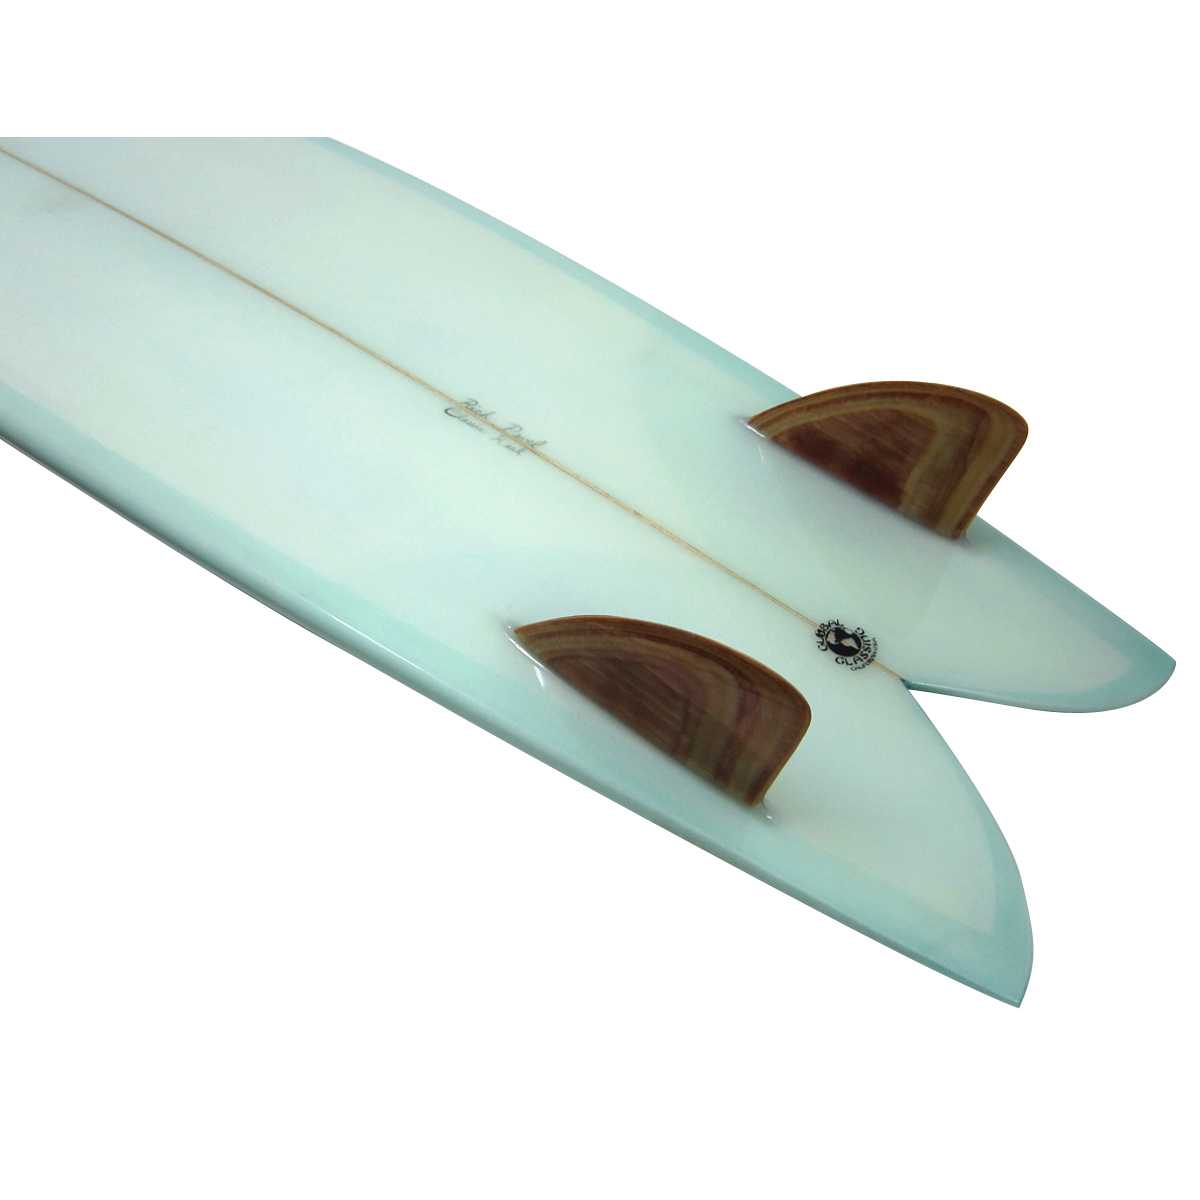 Rainbow / Classic Keel 6`2 Shaped By Rich Pavel